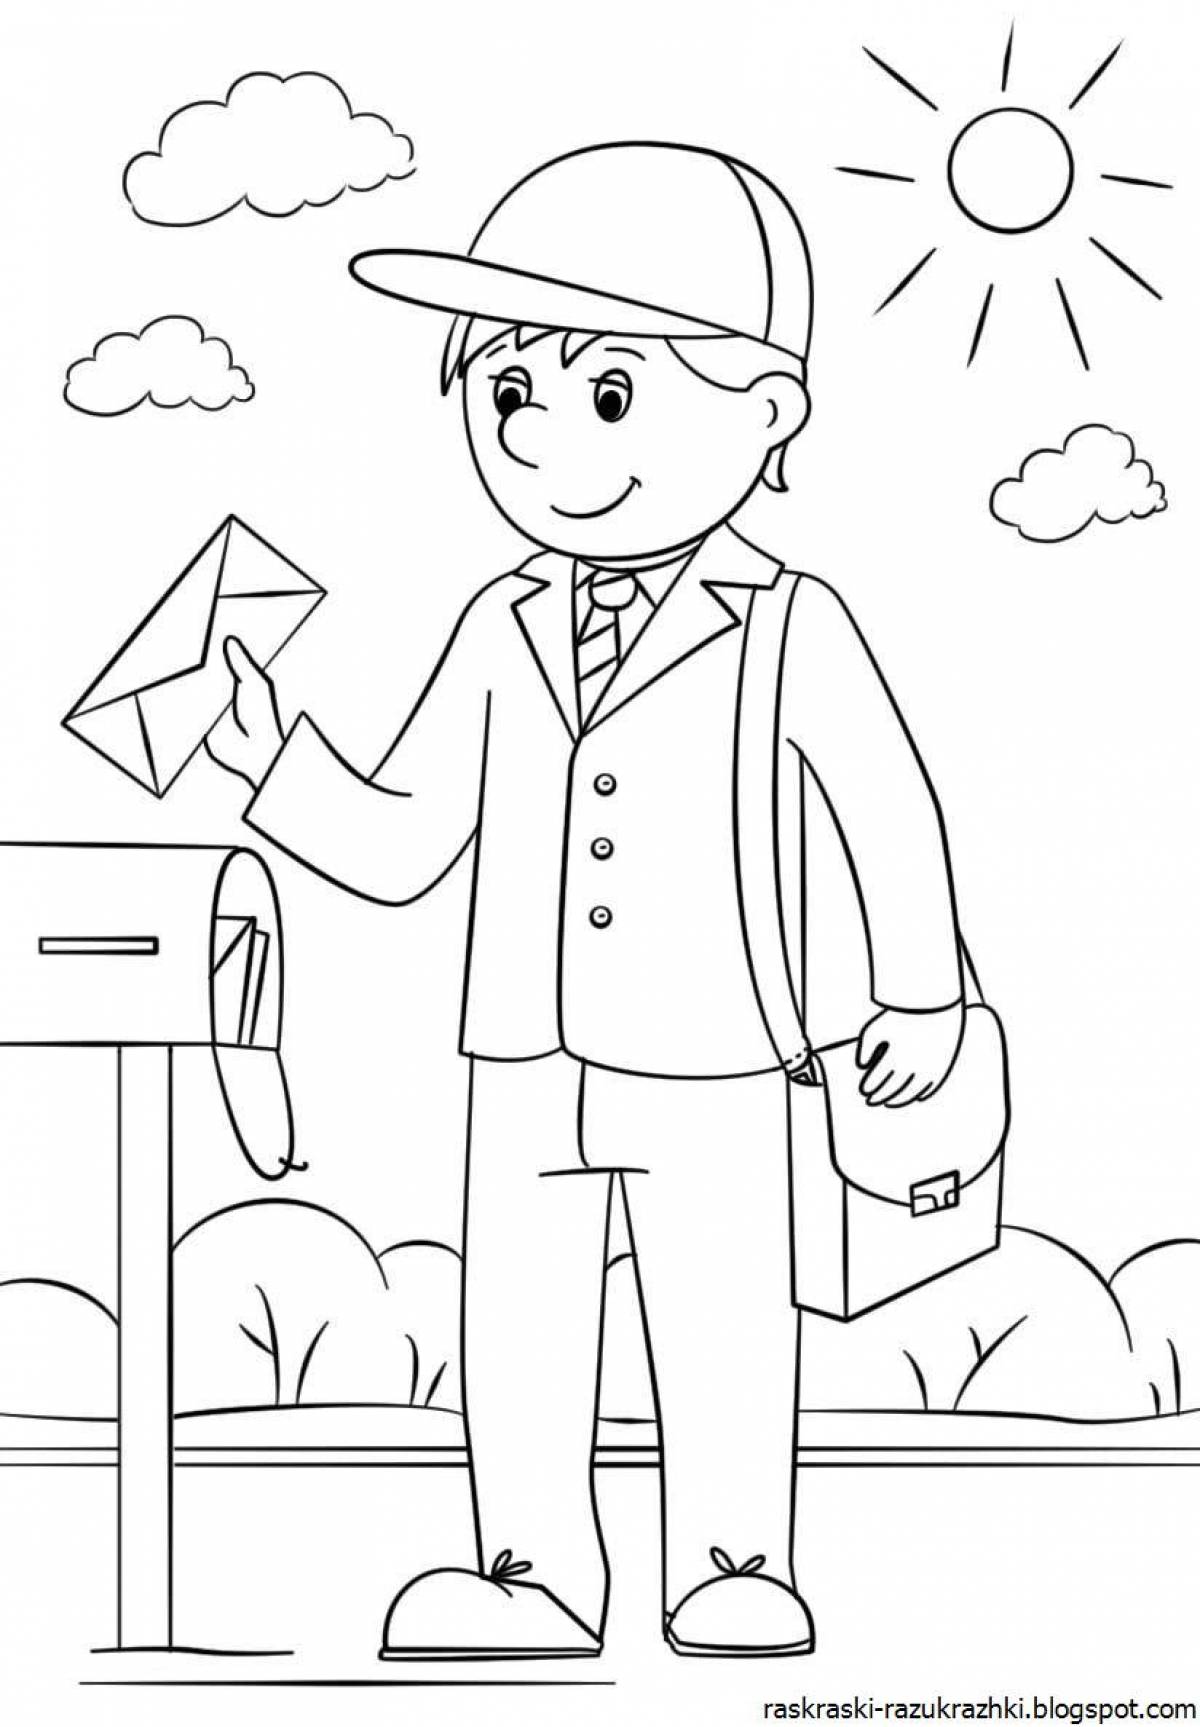 Funny job coloring pages for kids 7 years old